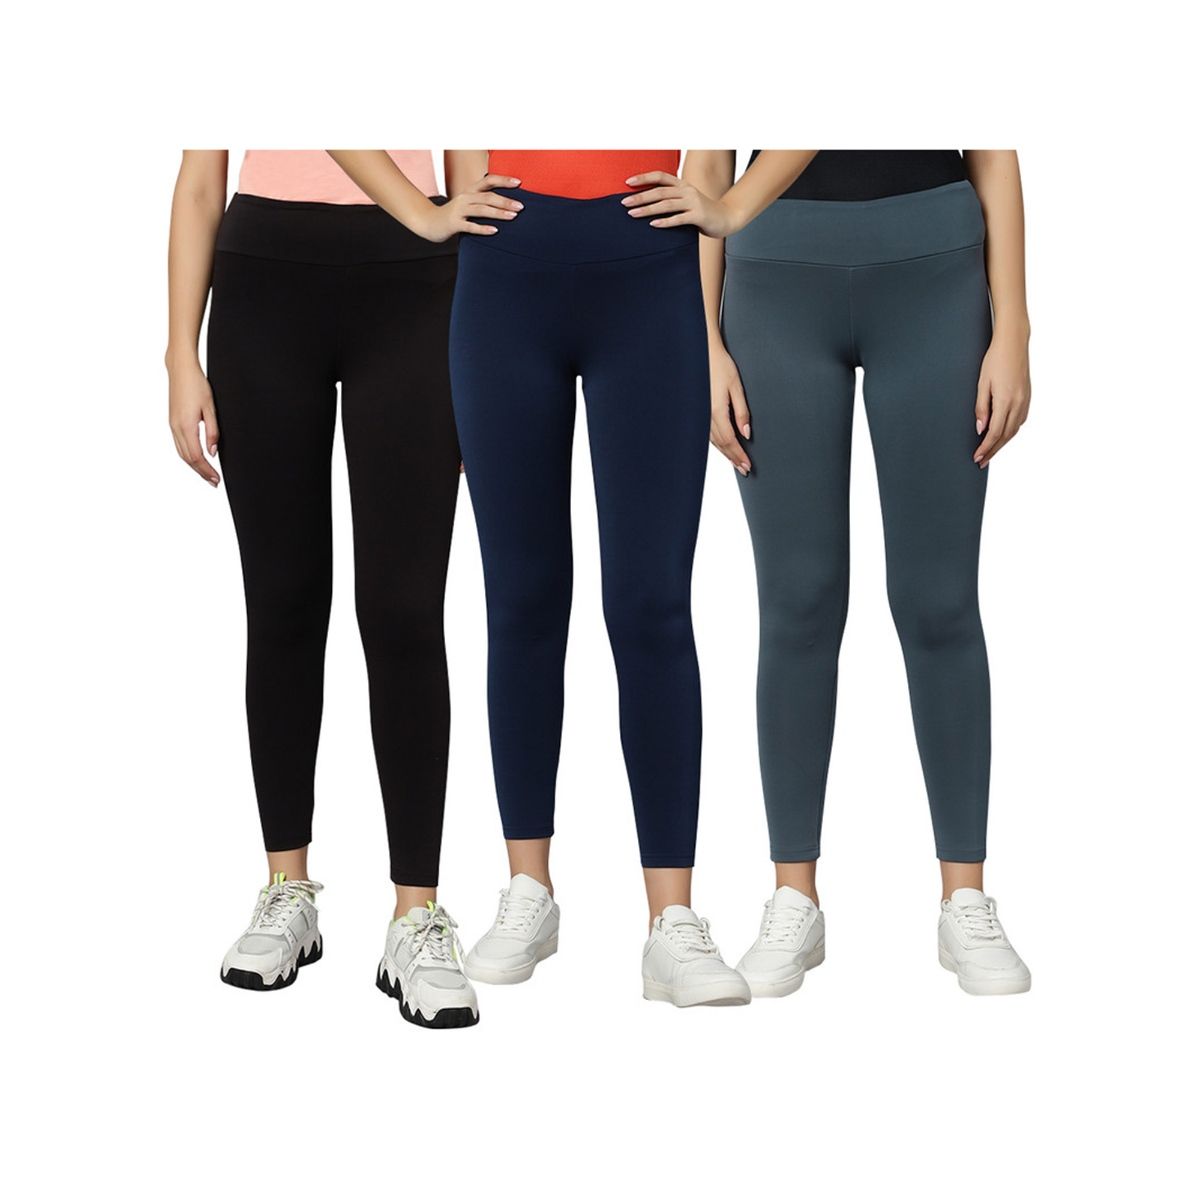 Buy Omtex Yoga Pants for Women Stretchable Tights Sports Fitness Gym Yoga  Pants Black online